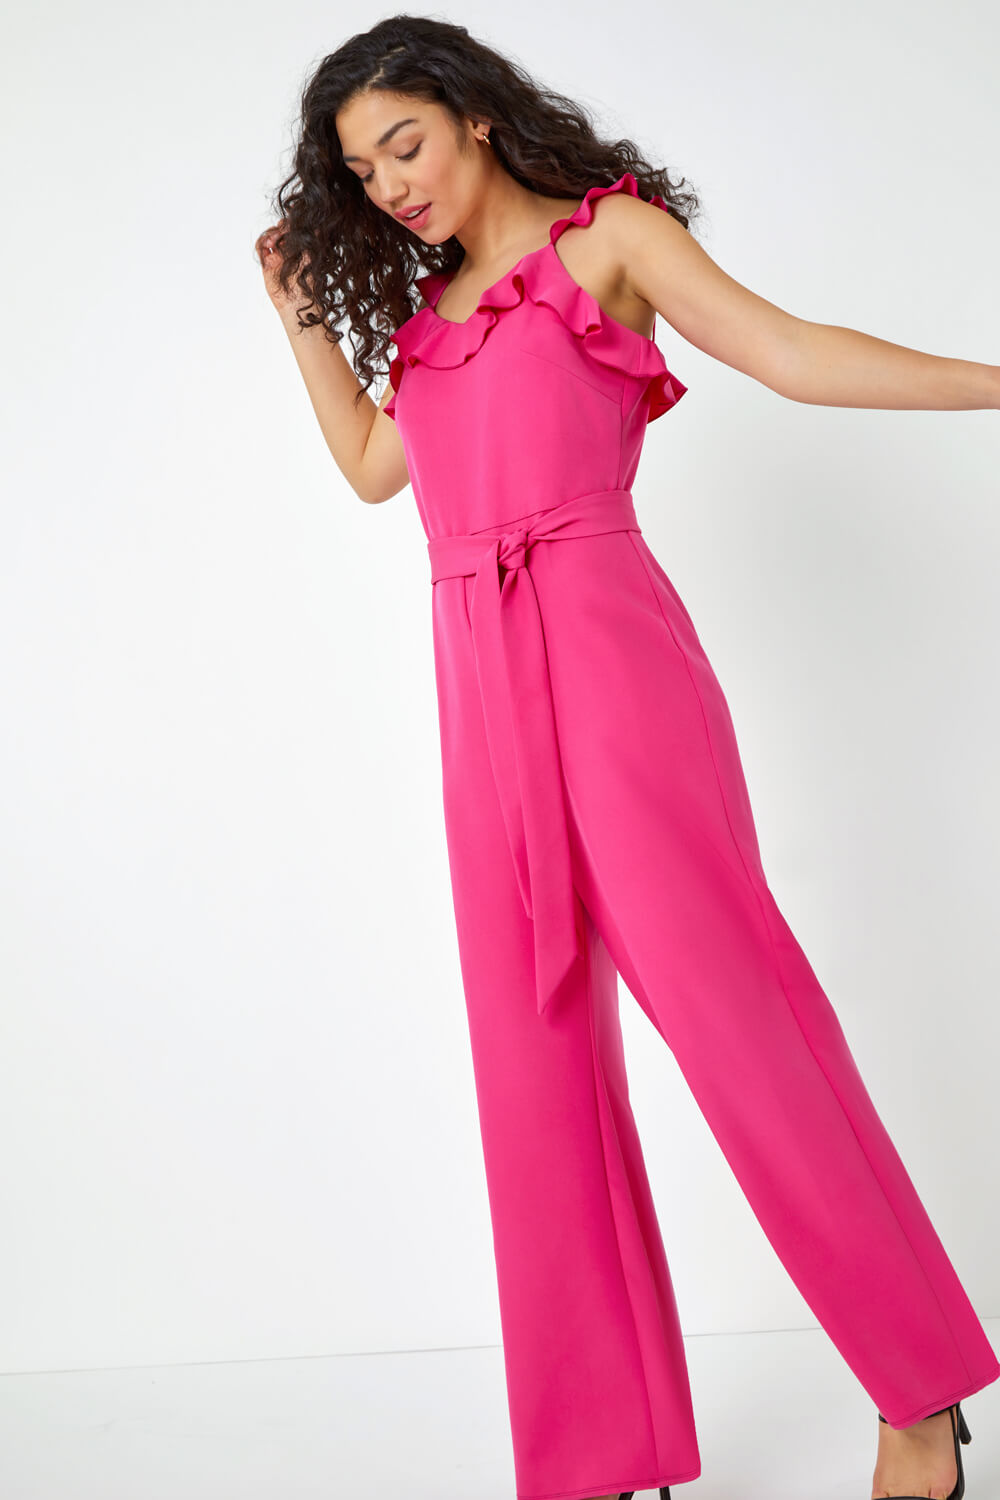 PINK Frill Detail Wide Leg Jumpsuit, Image 2 of 5